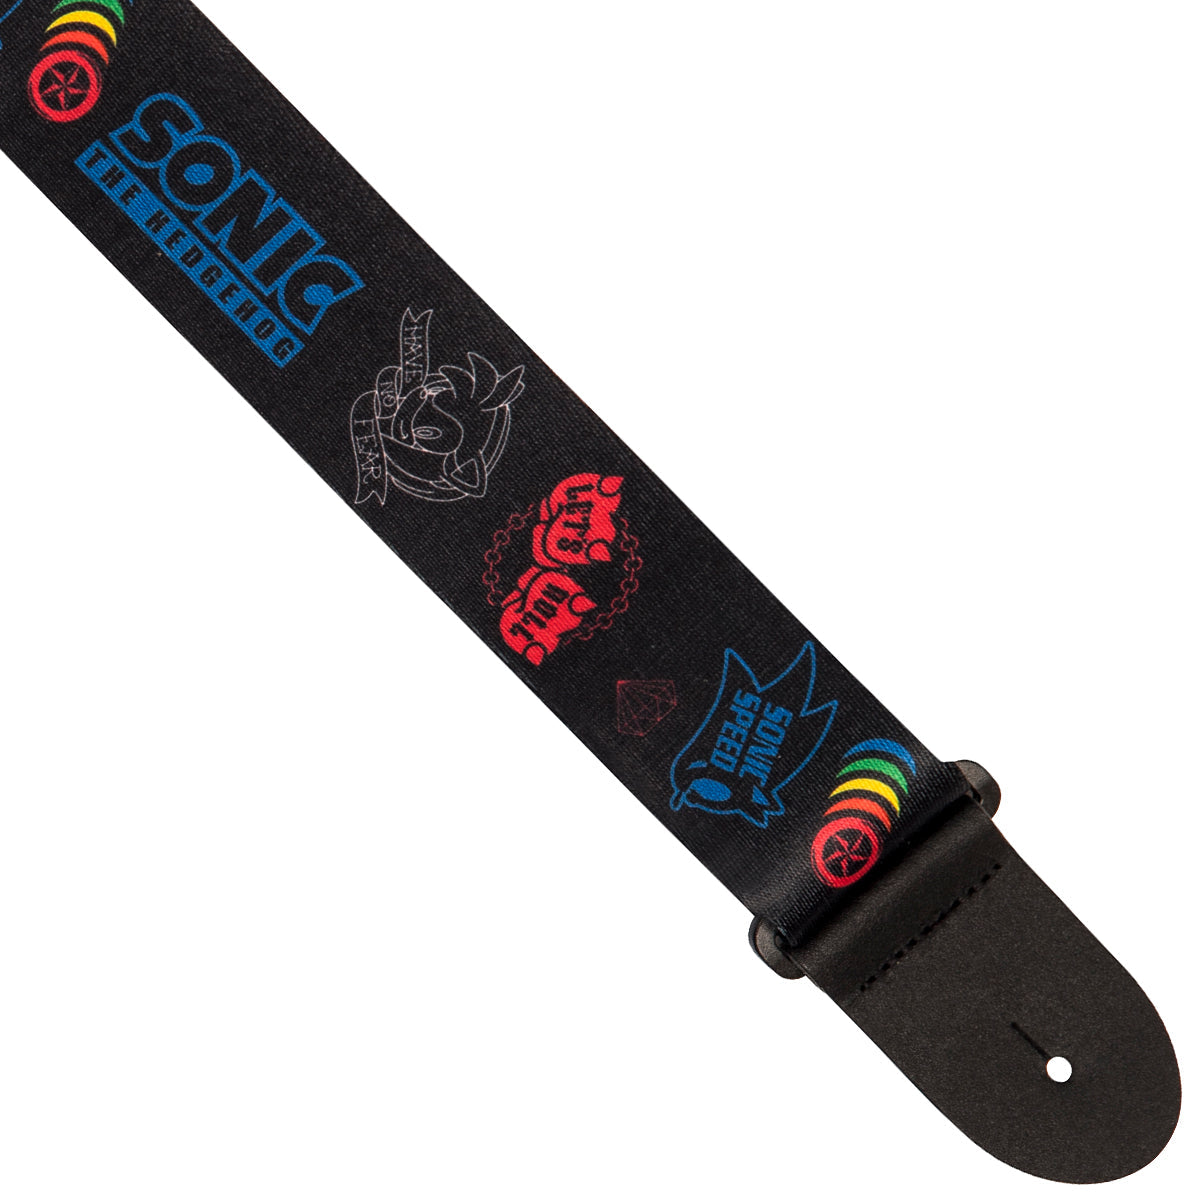 Perri's Official Sonic The Hedgehog Polyester 2" Guitar Strap ~ Black/Blue/Red